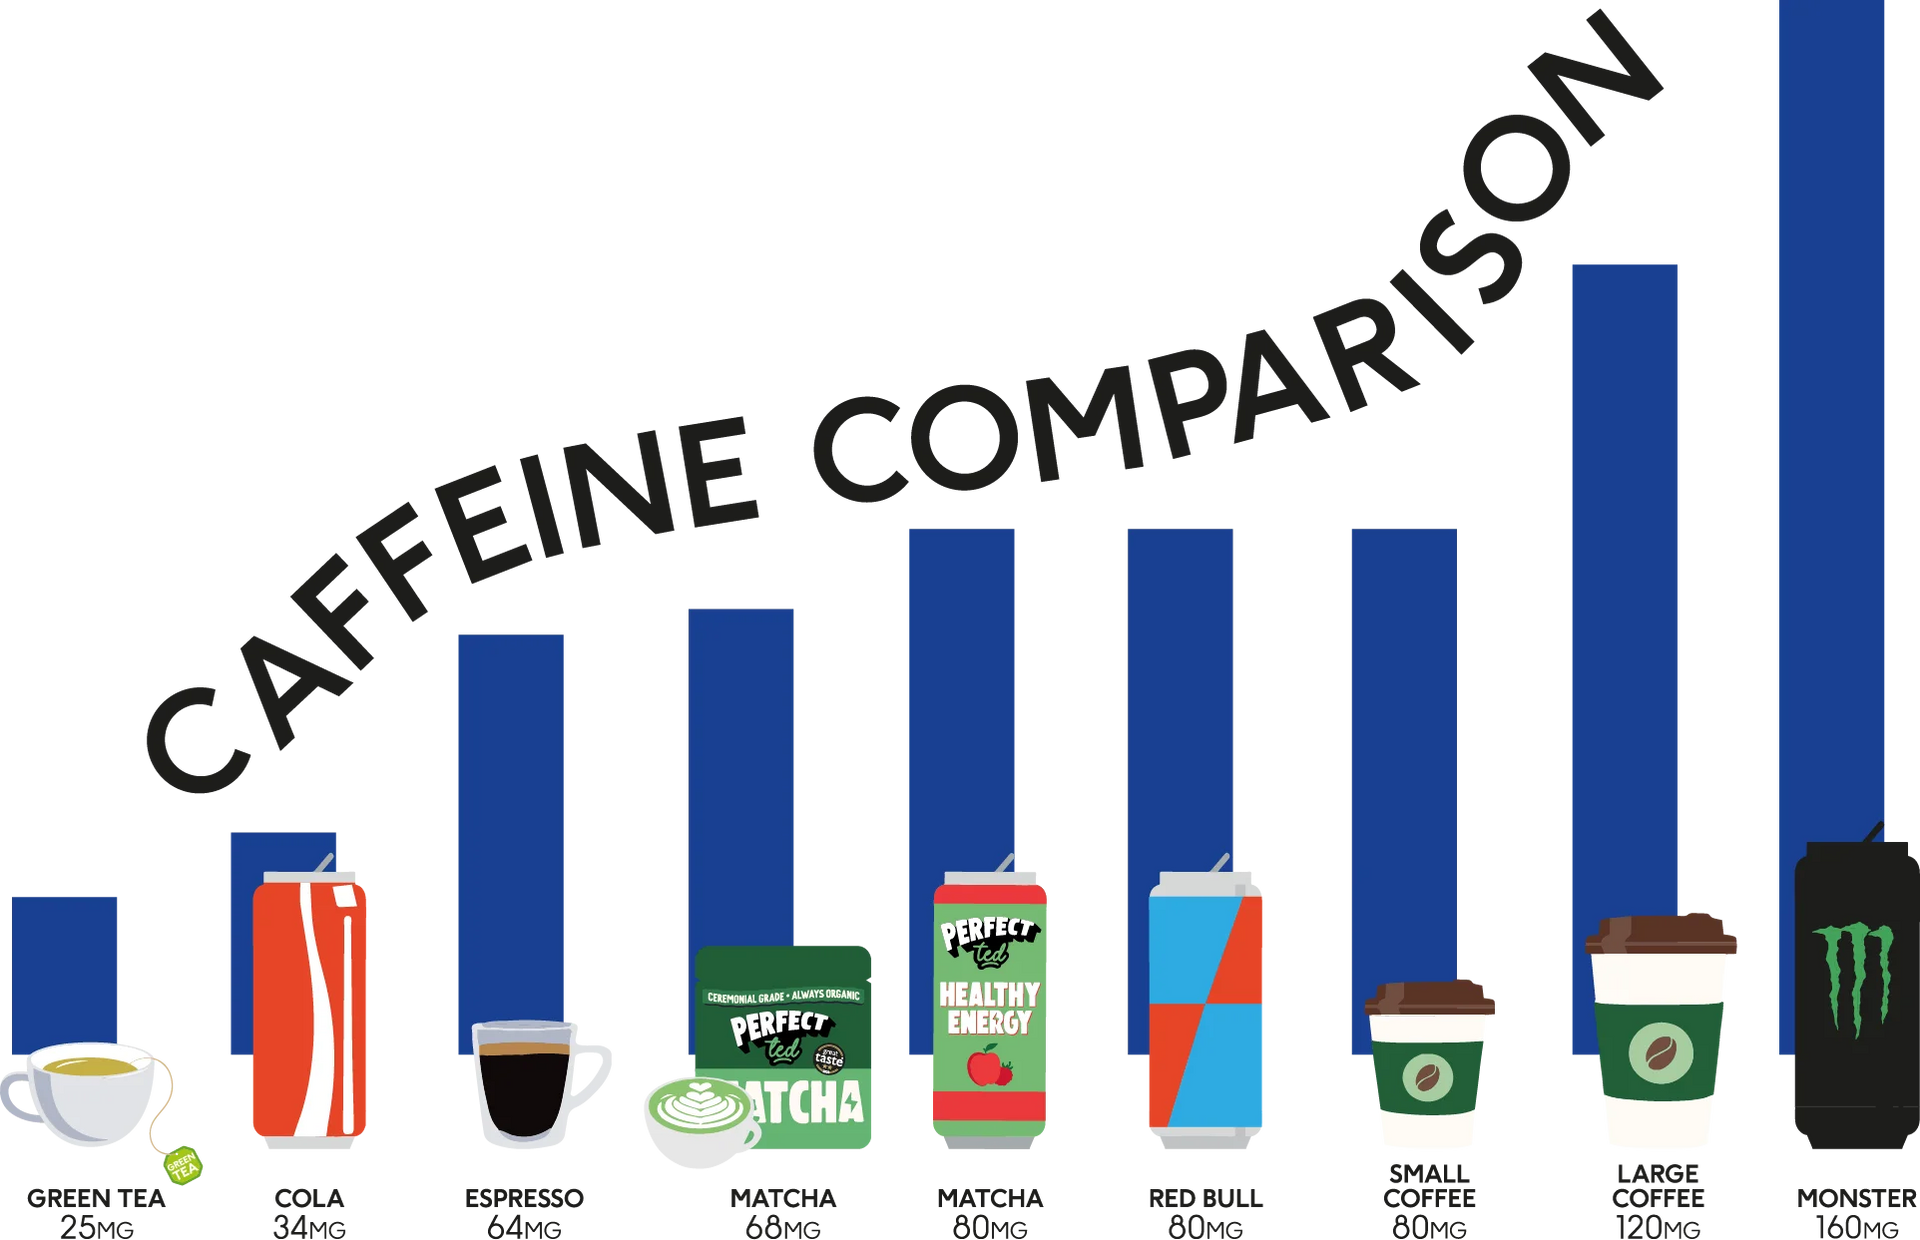 Caffeine comparison chat showing PerfectTed energy drinks at 80mg compared to Monster at 160mg